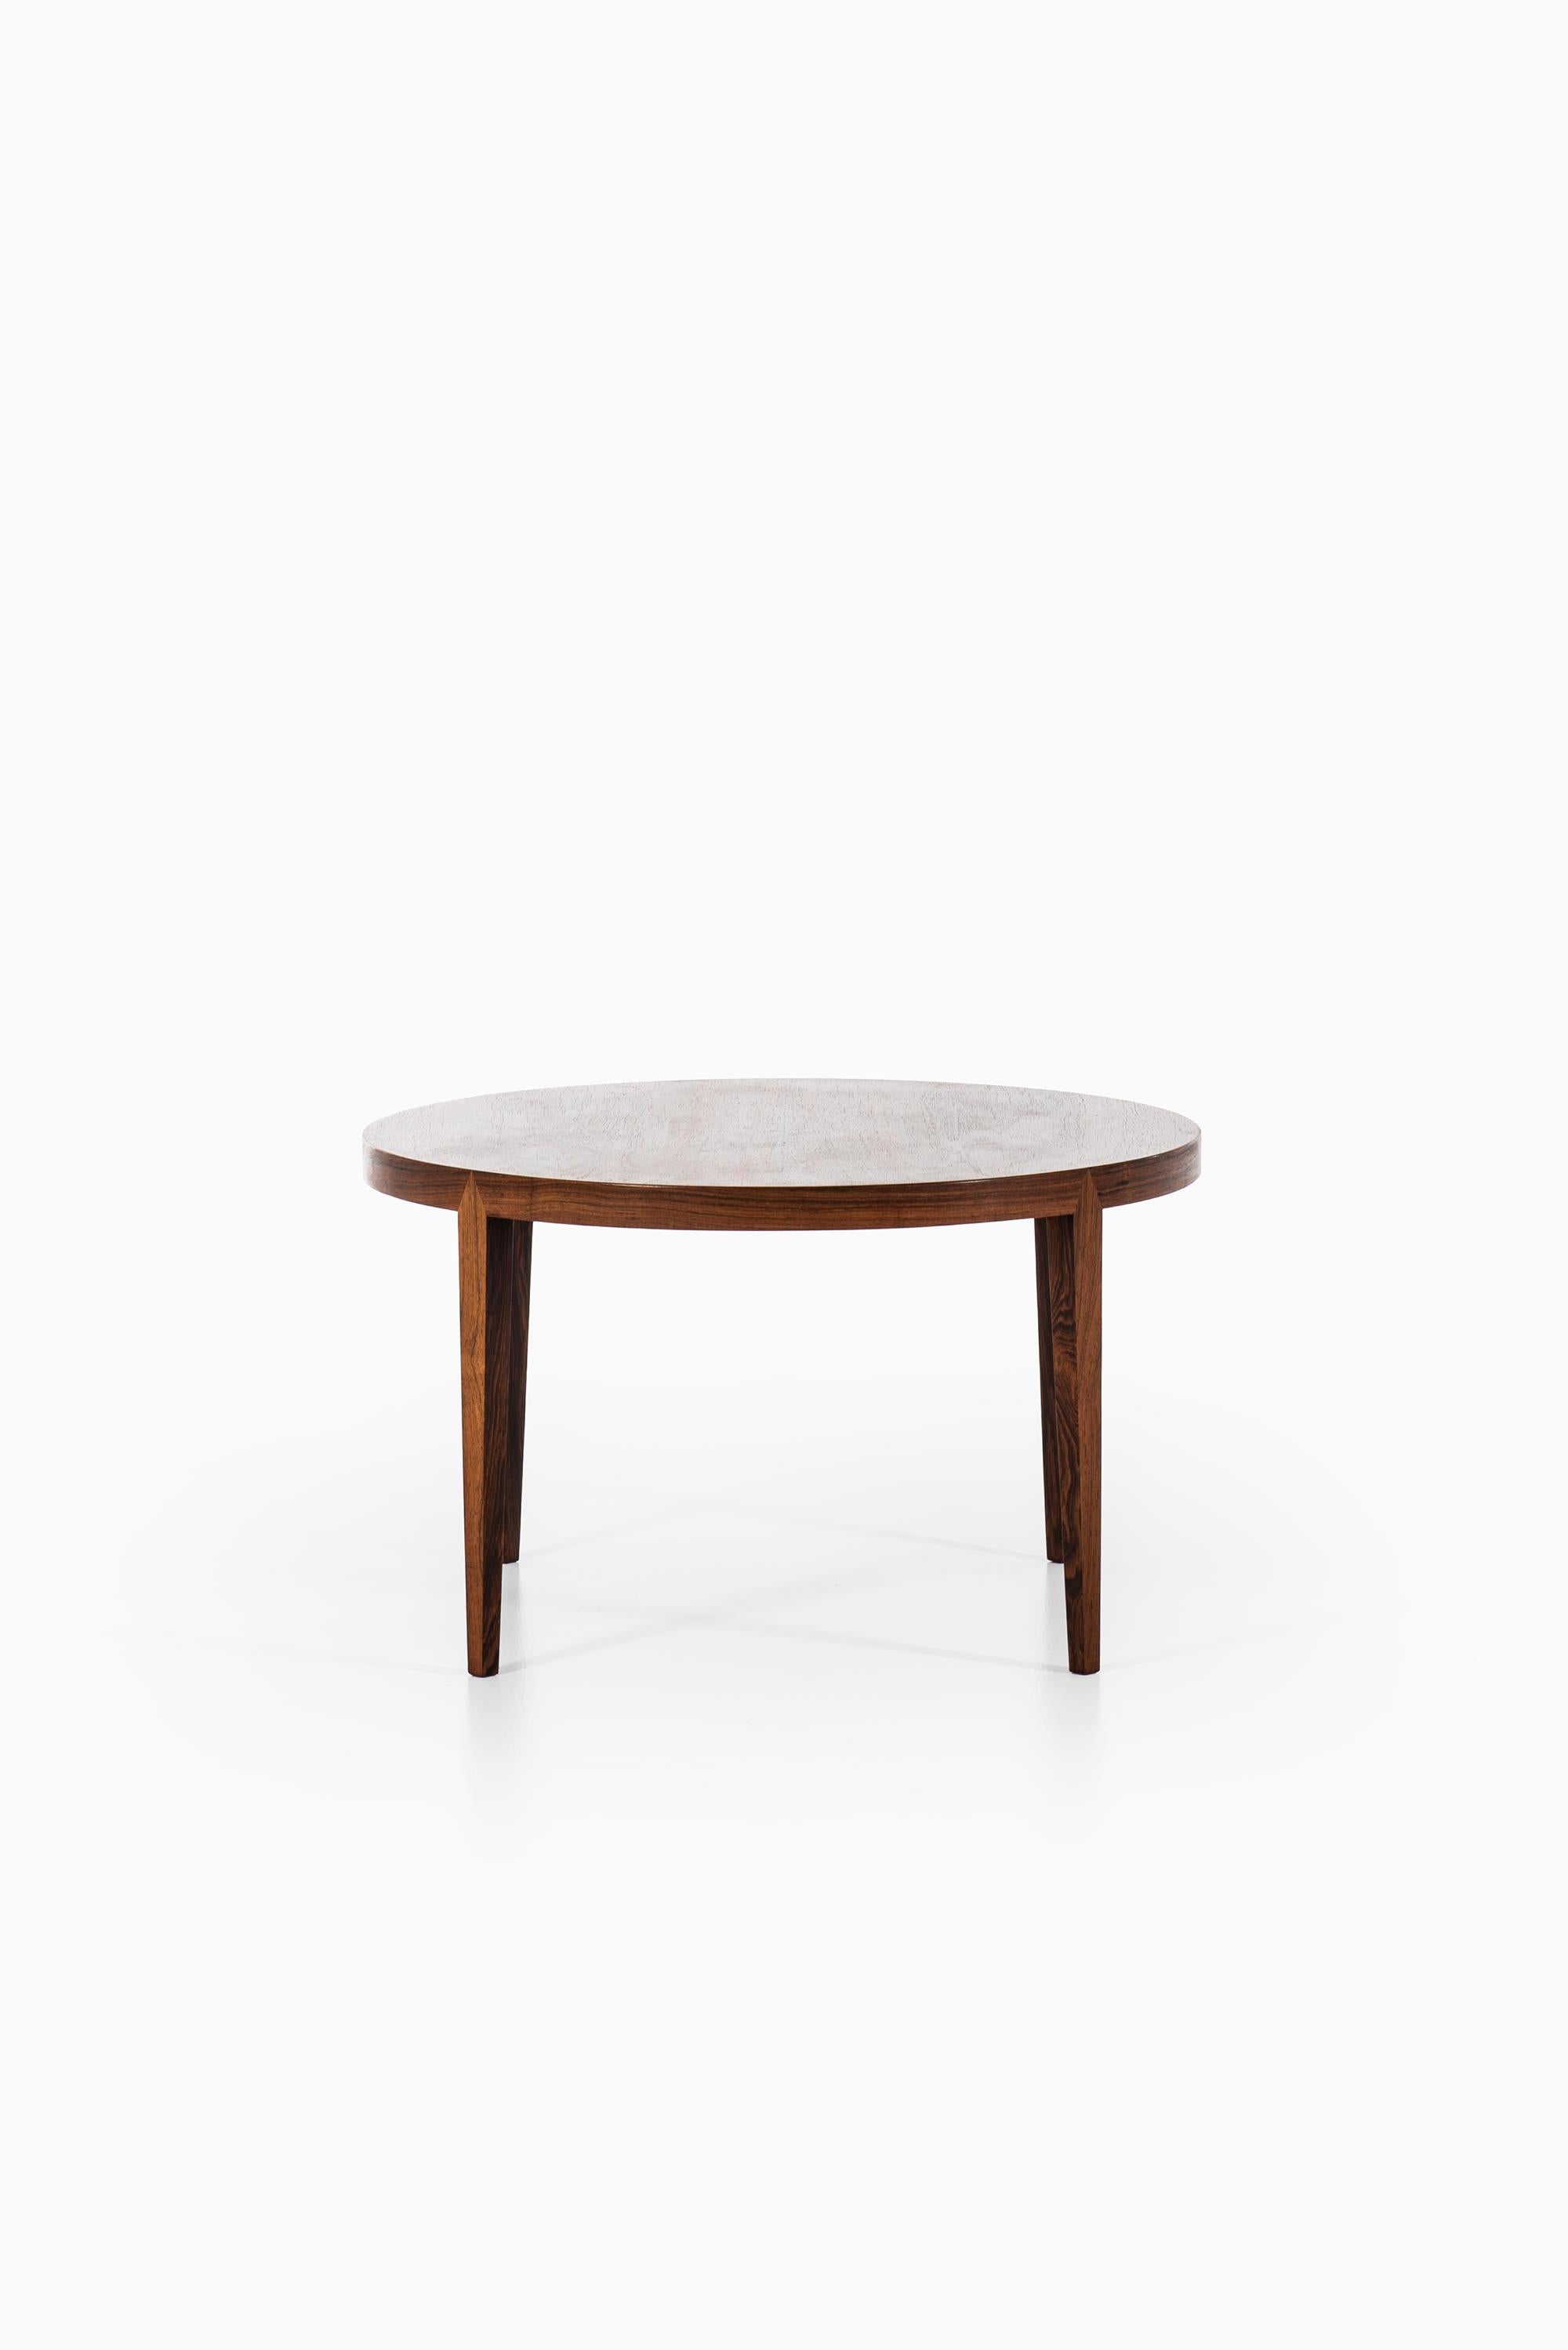 Rare coffee table designed by Severin Hansen. Produced by Haslev møbelsnedkeri in Denmark.